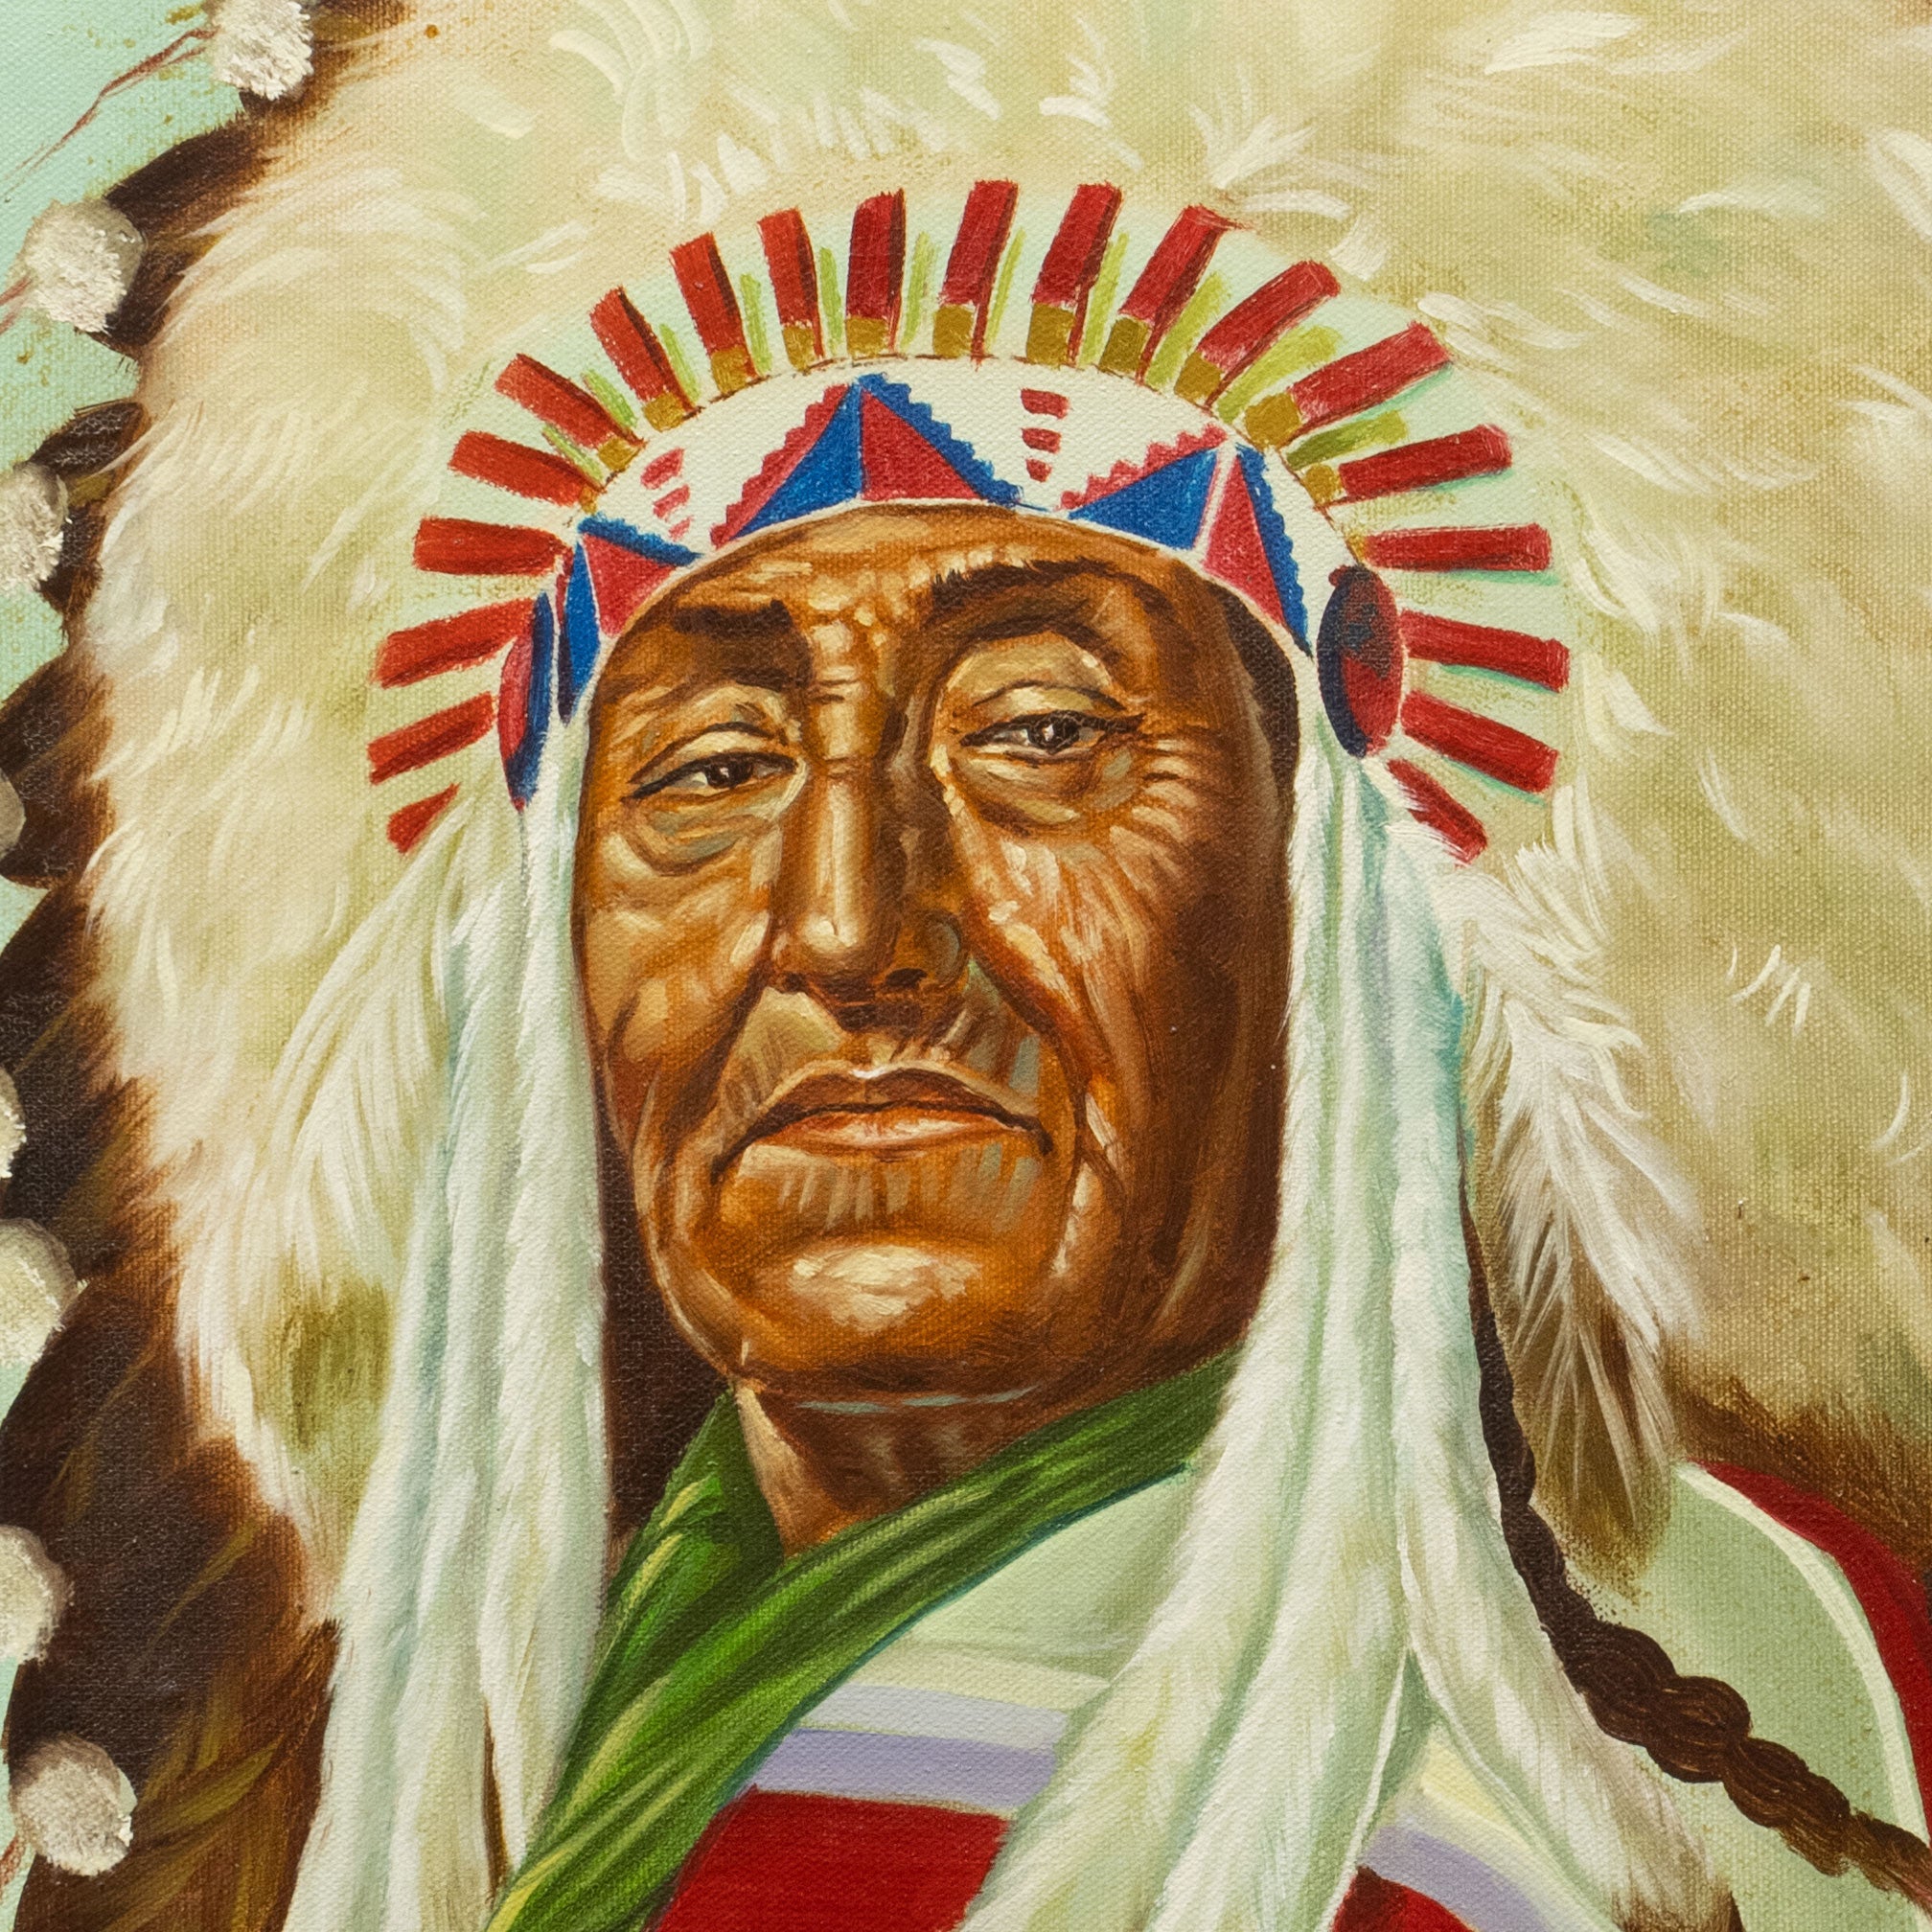 Indian Chief by Fichte